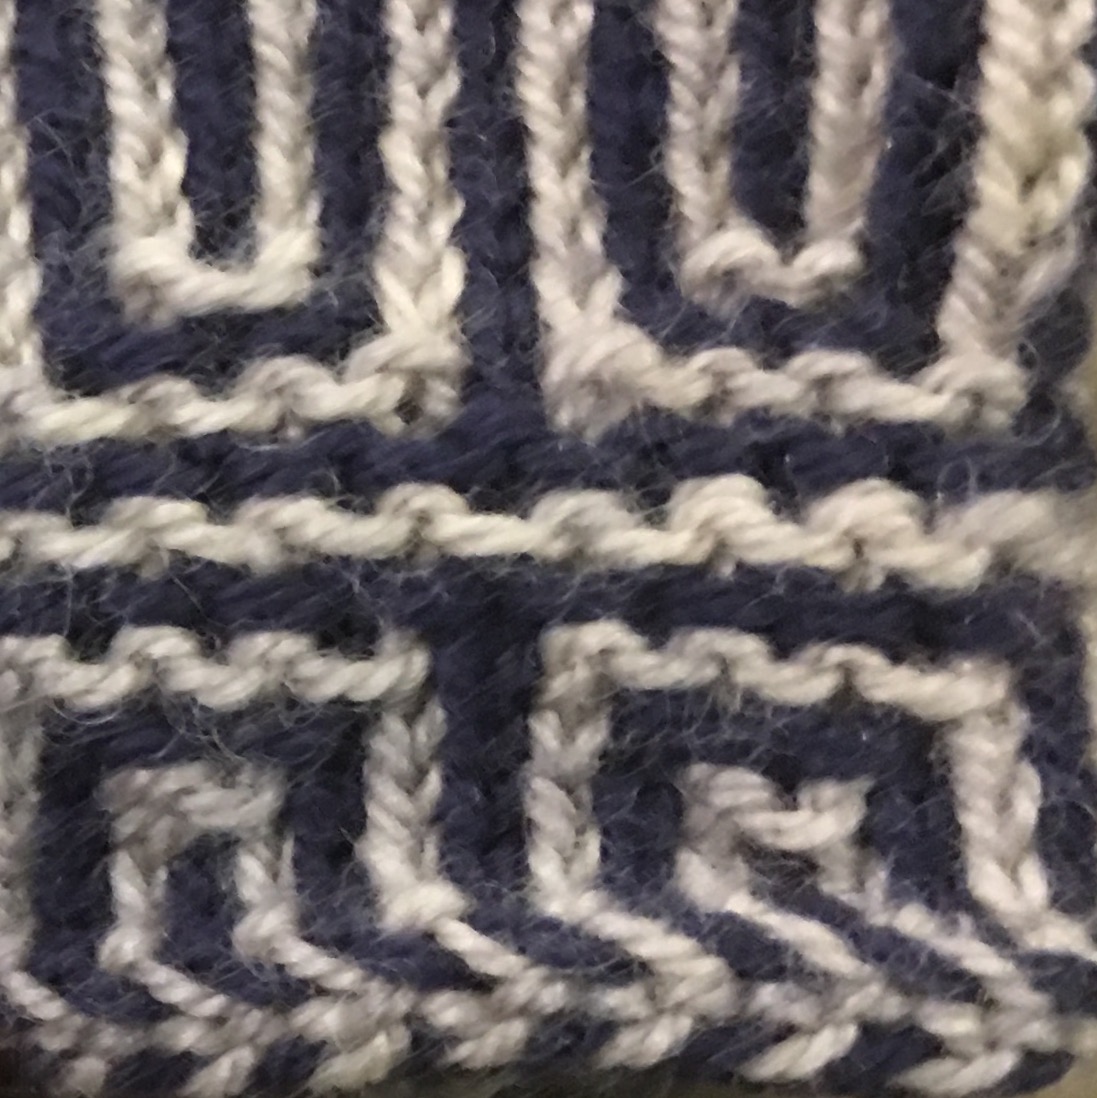 close-up of 2-color twined knitting